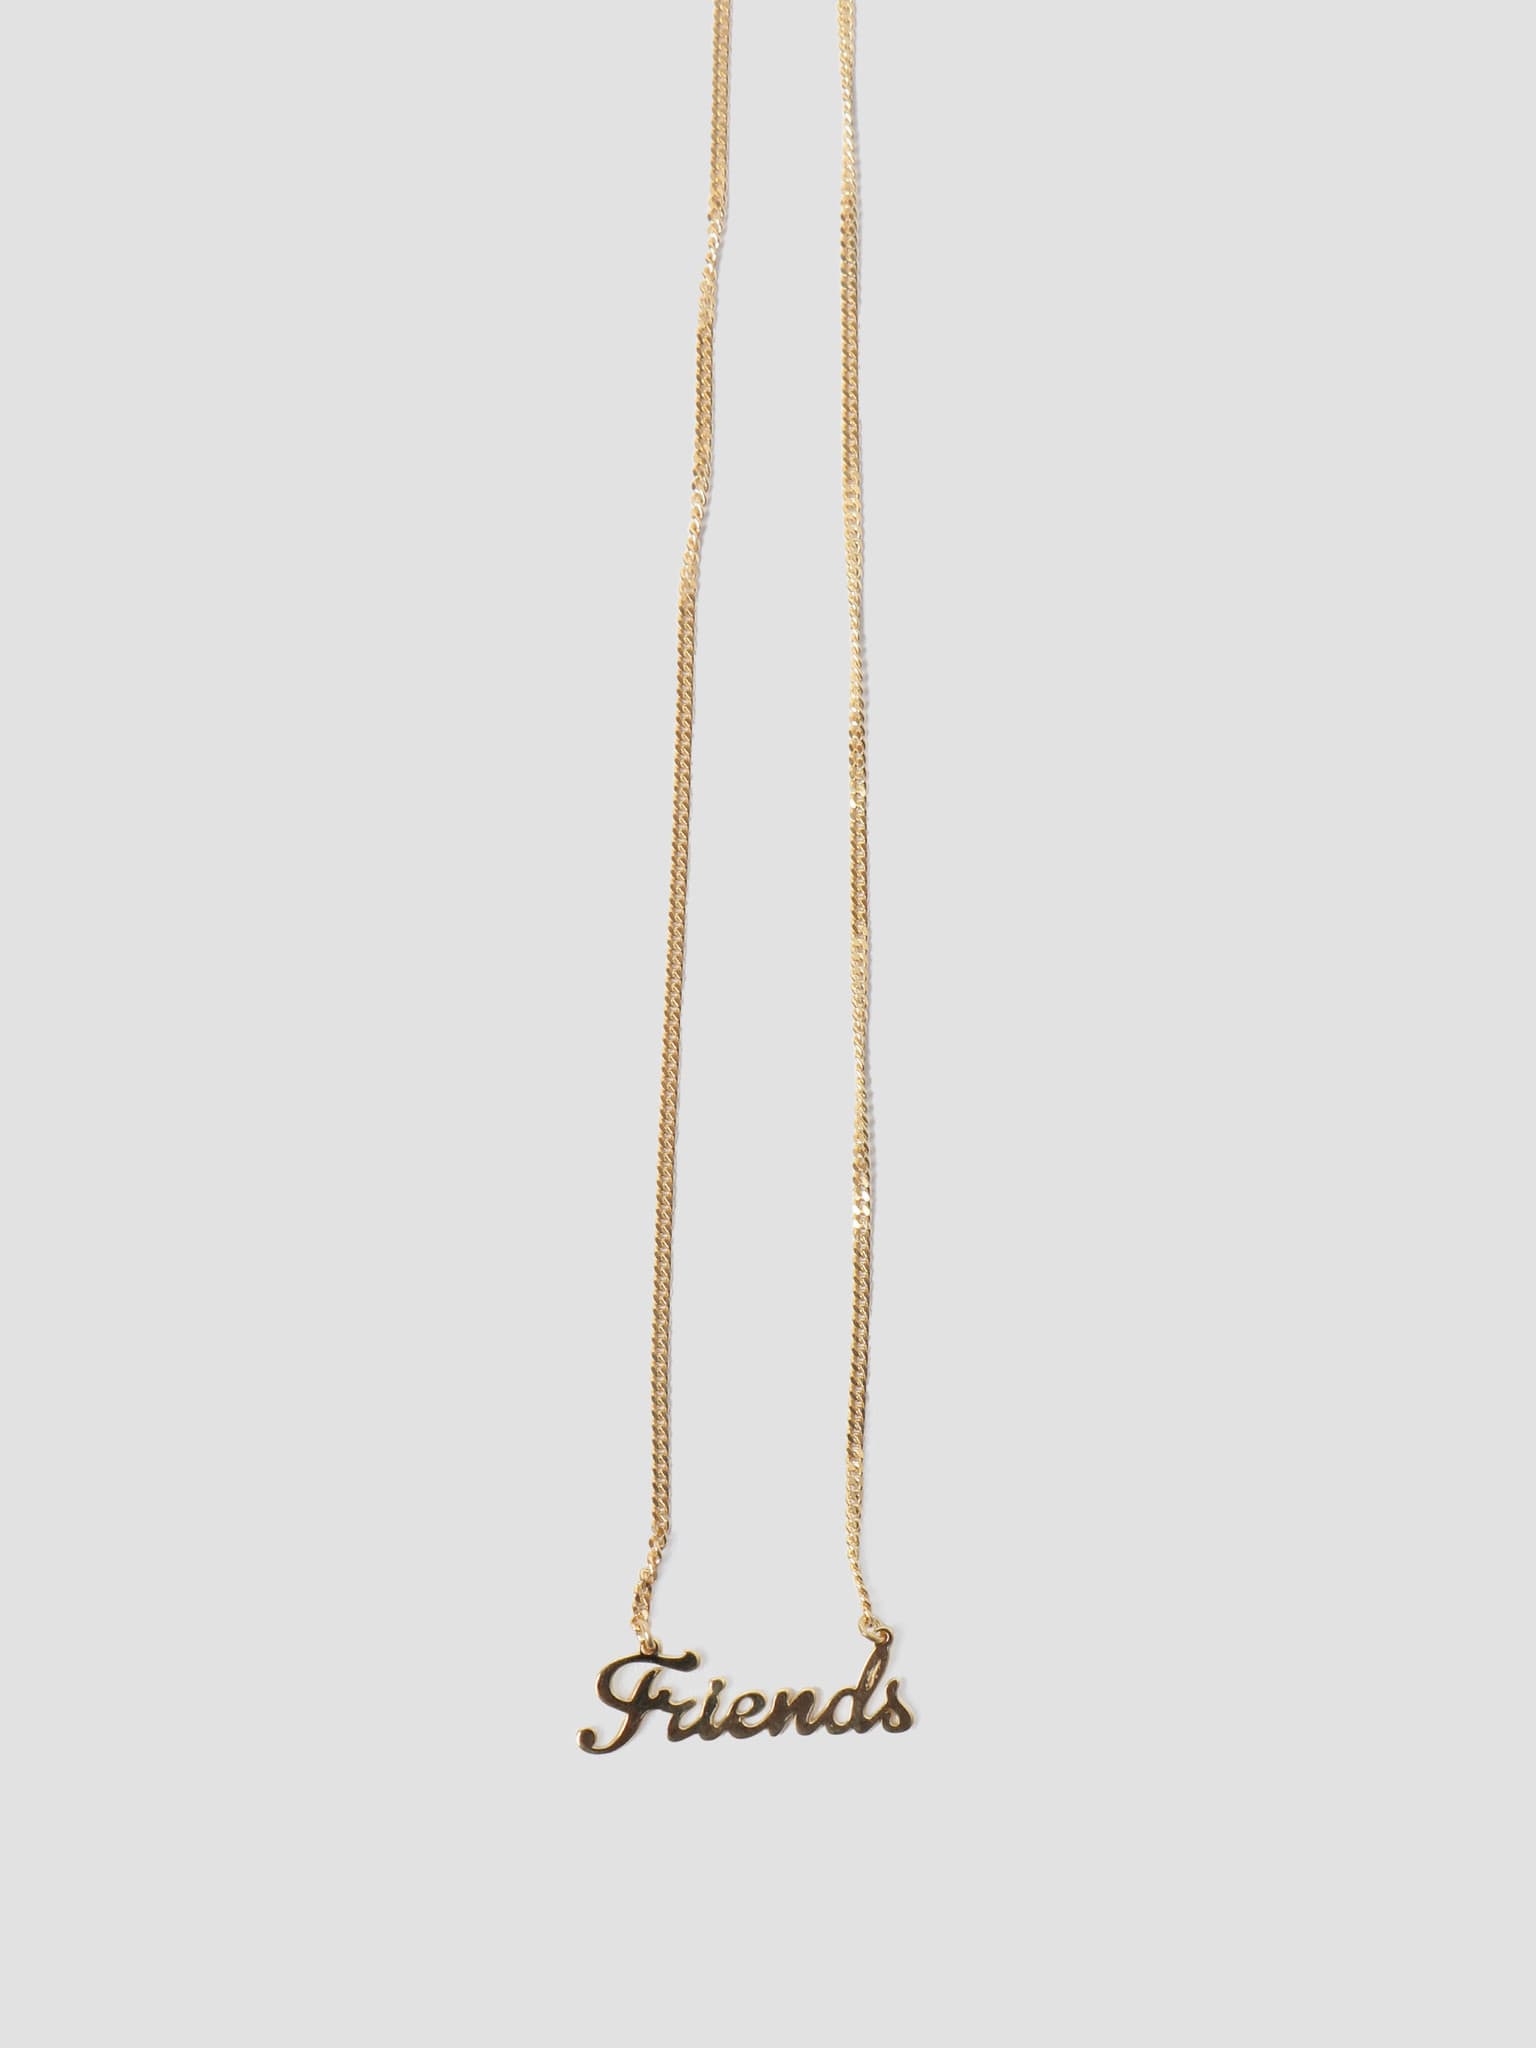 by Freshcotton Friends Necklace 55cm 14K Gold Plated